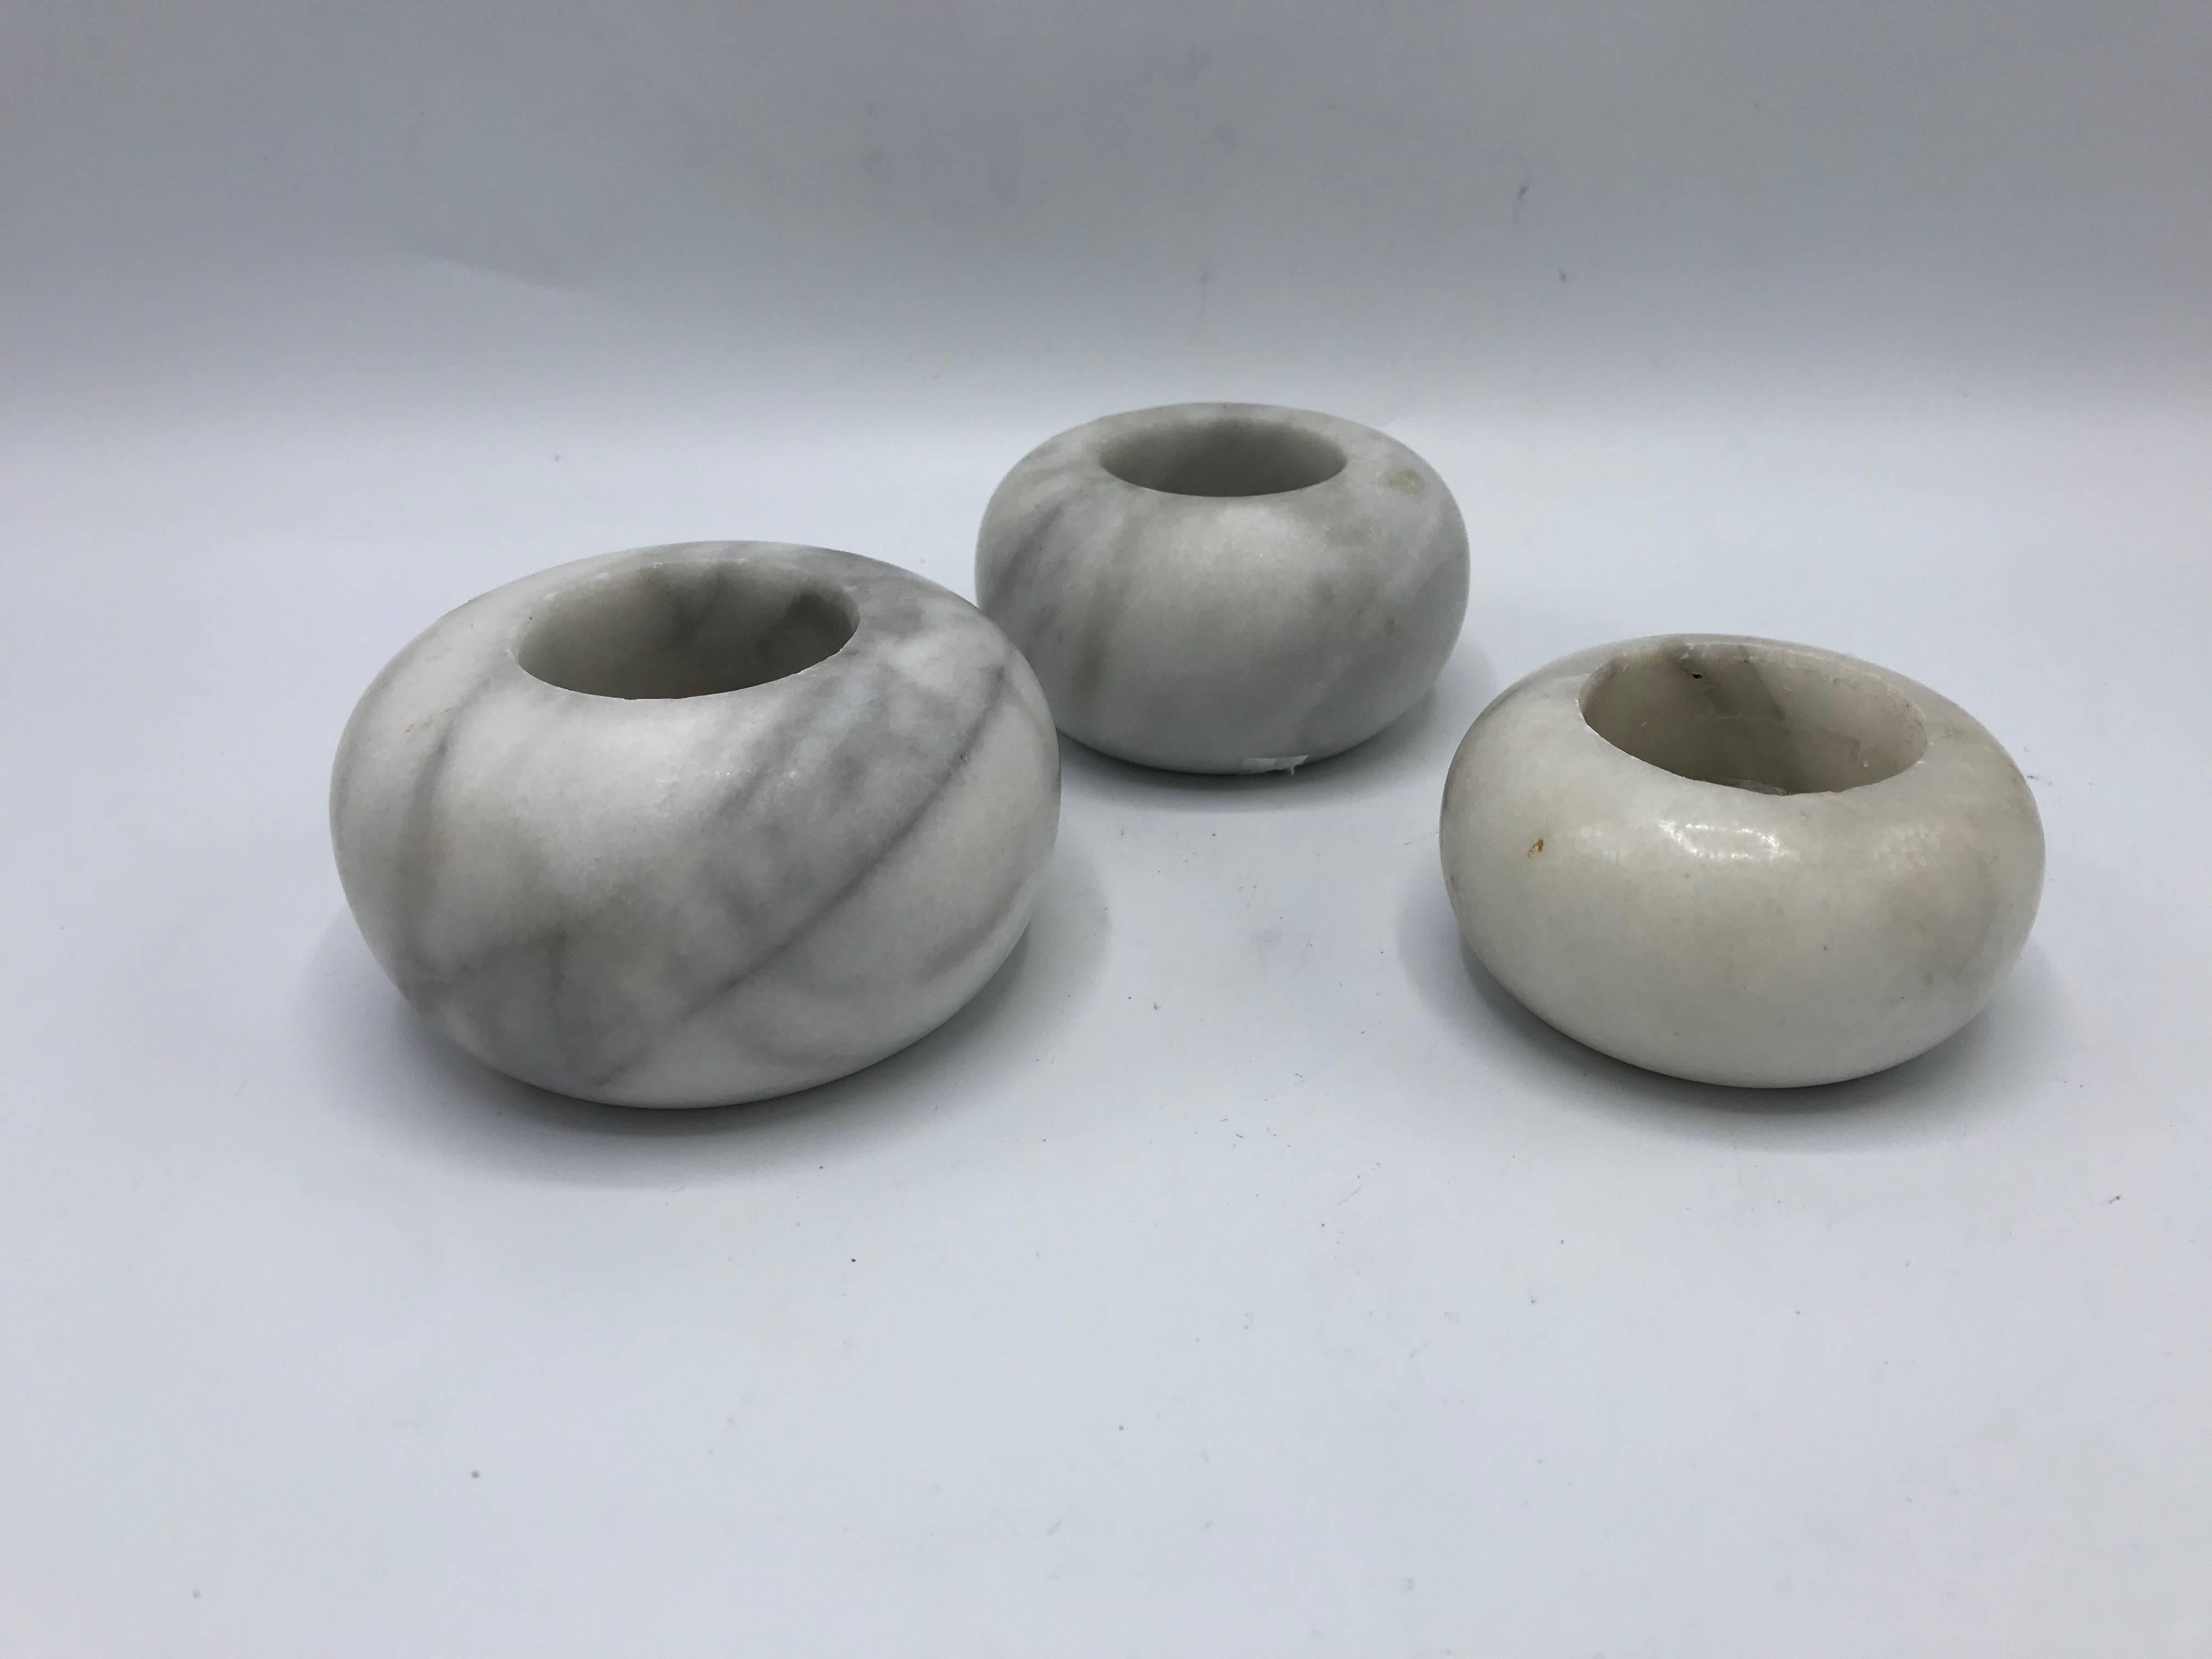 Offered is a fabulous, set of three, 1960s Italian white marble votive candleholders. Set of three descend in size. Heavy.
Measures:
Large 3.75" x 2"
Medium 3.5" x 1.75"
Small 3" x 1.5".